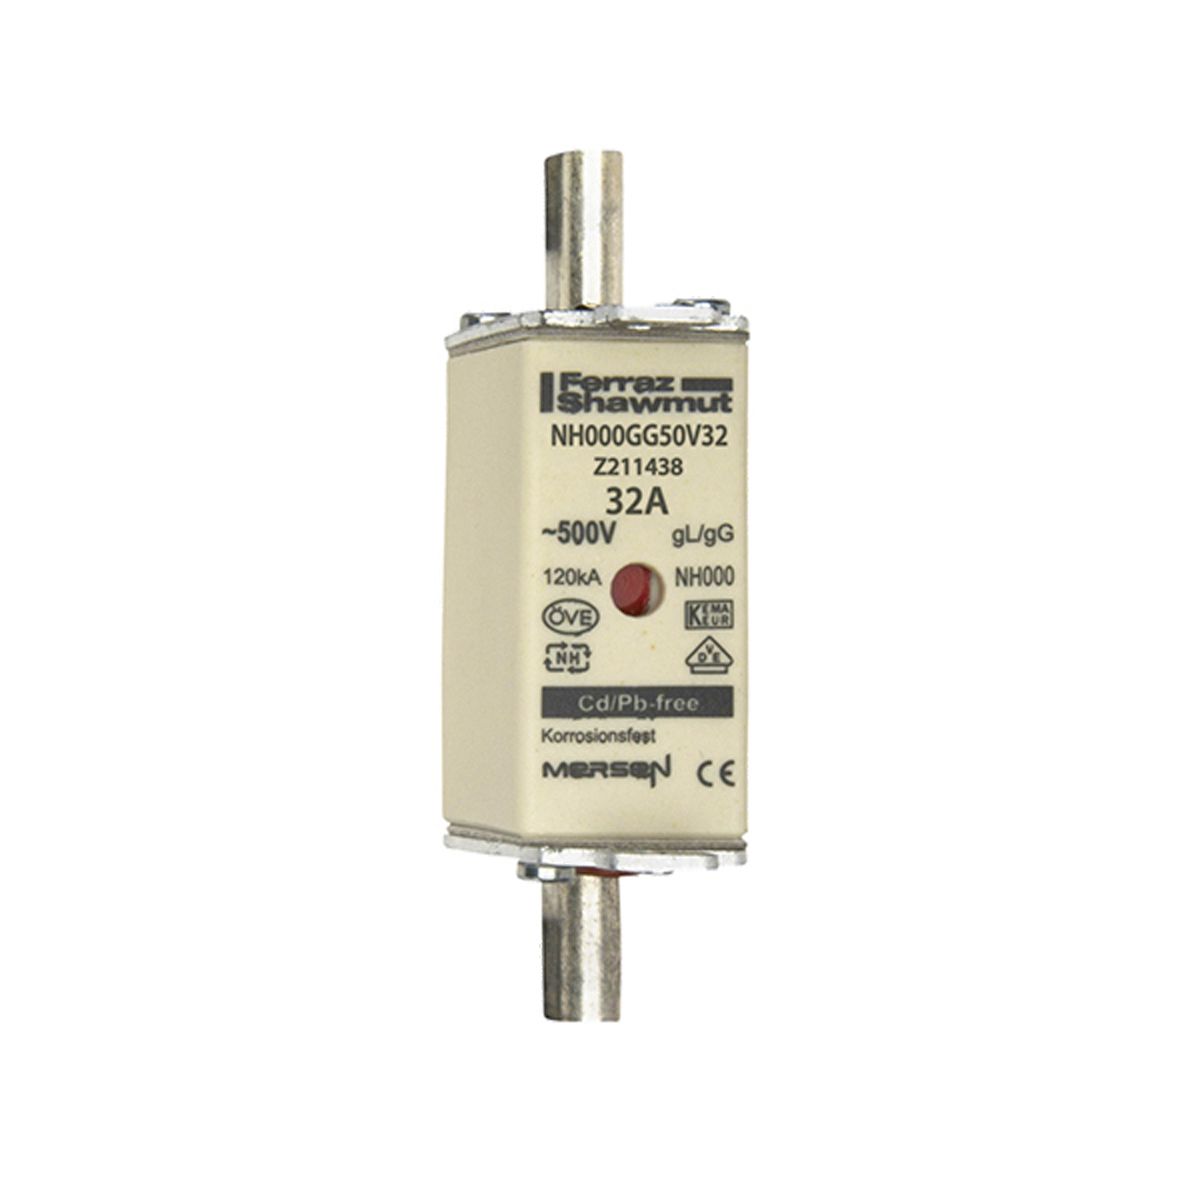 Z211438 - NH fuse-link gG, 500VAC, size 000, 32A double indicator/live tags